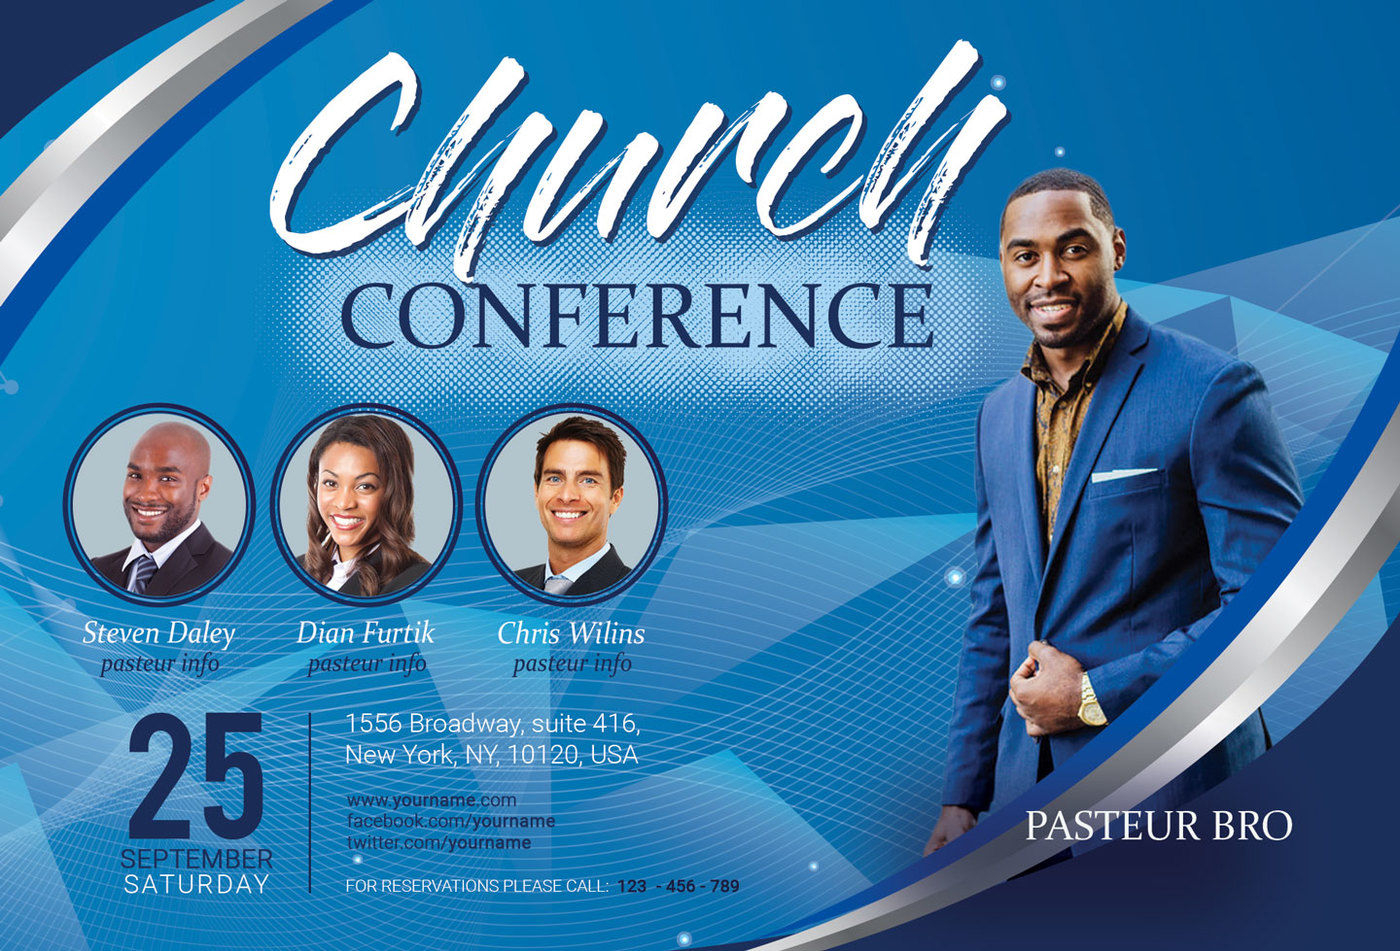 Church Conference Flyer By artolus  TheHungryJPEG Intended For Church Conference Flyer Template